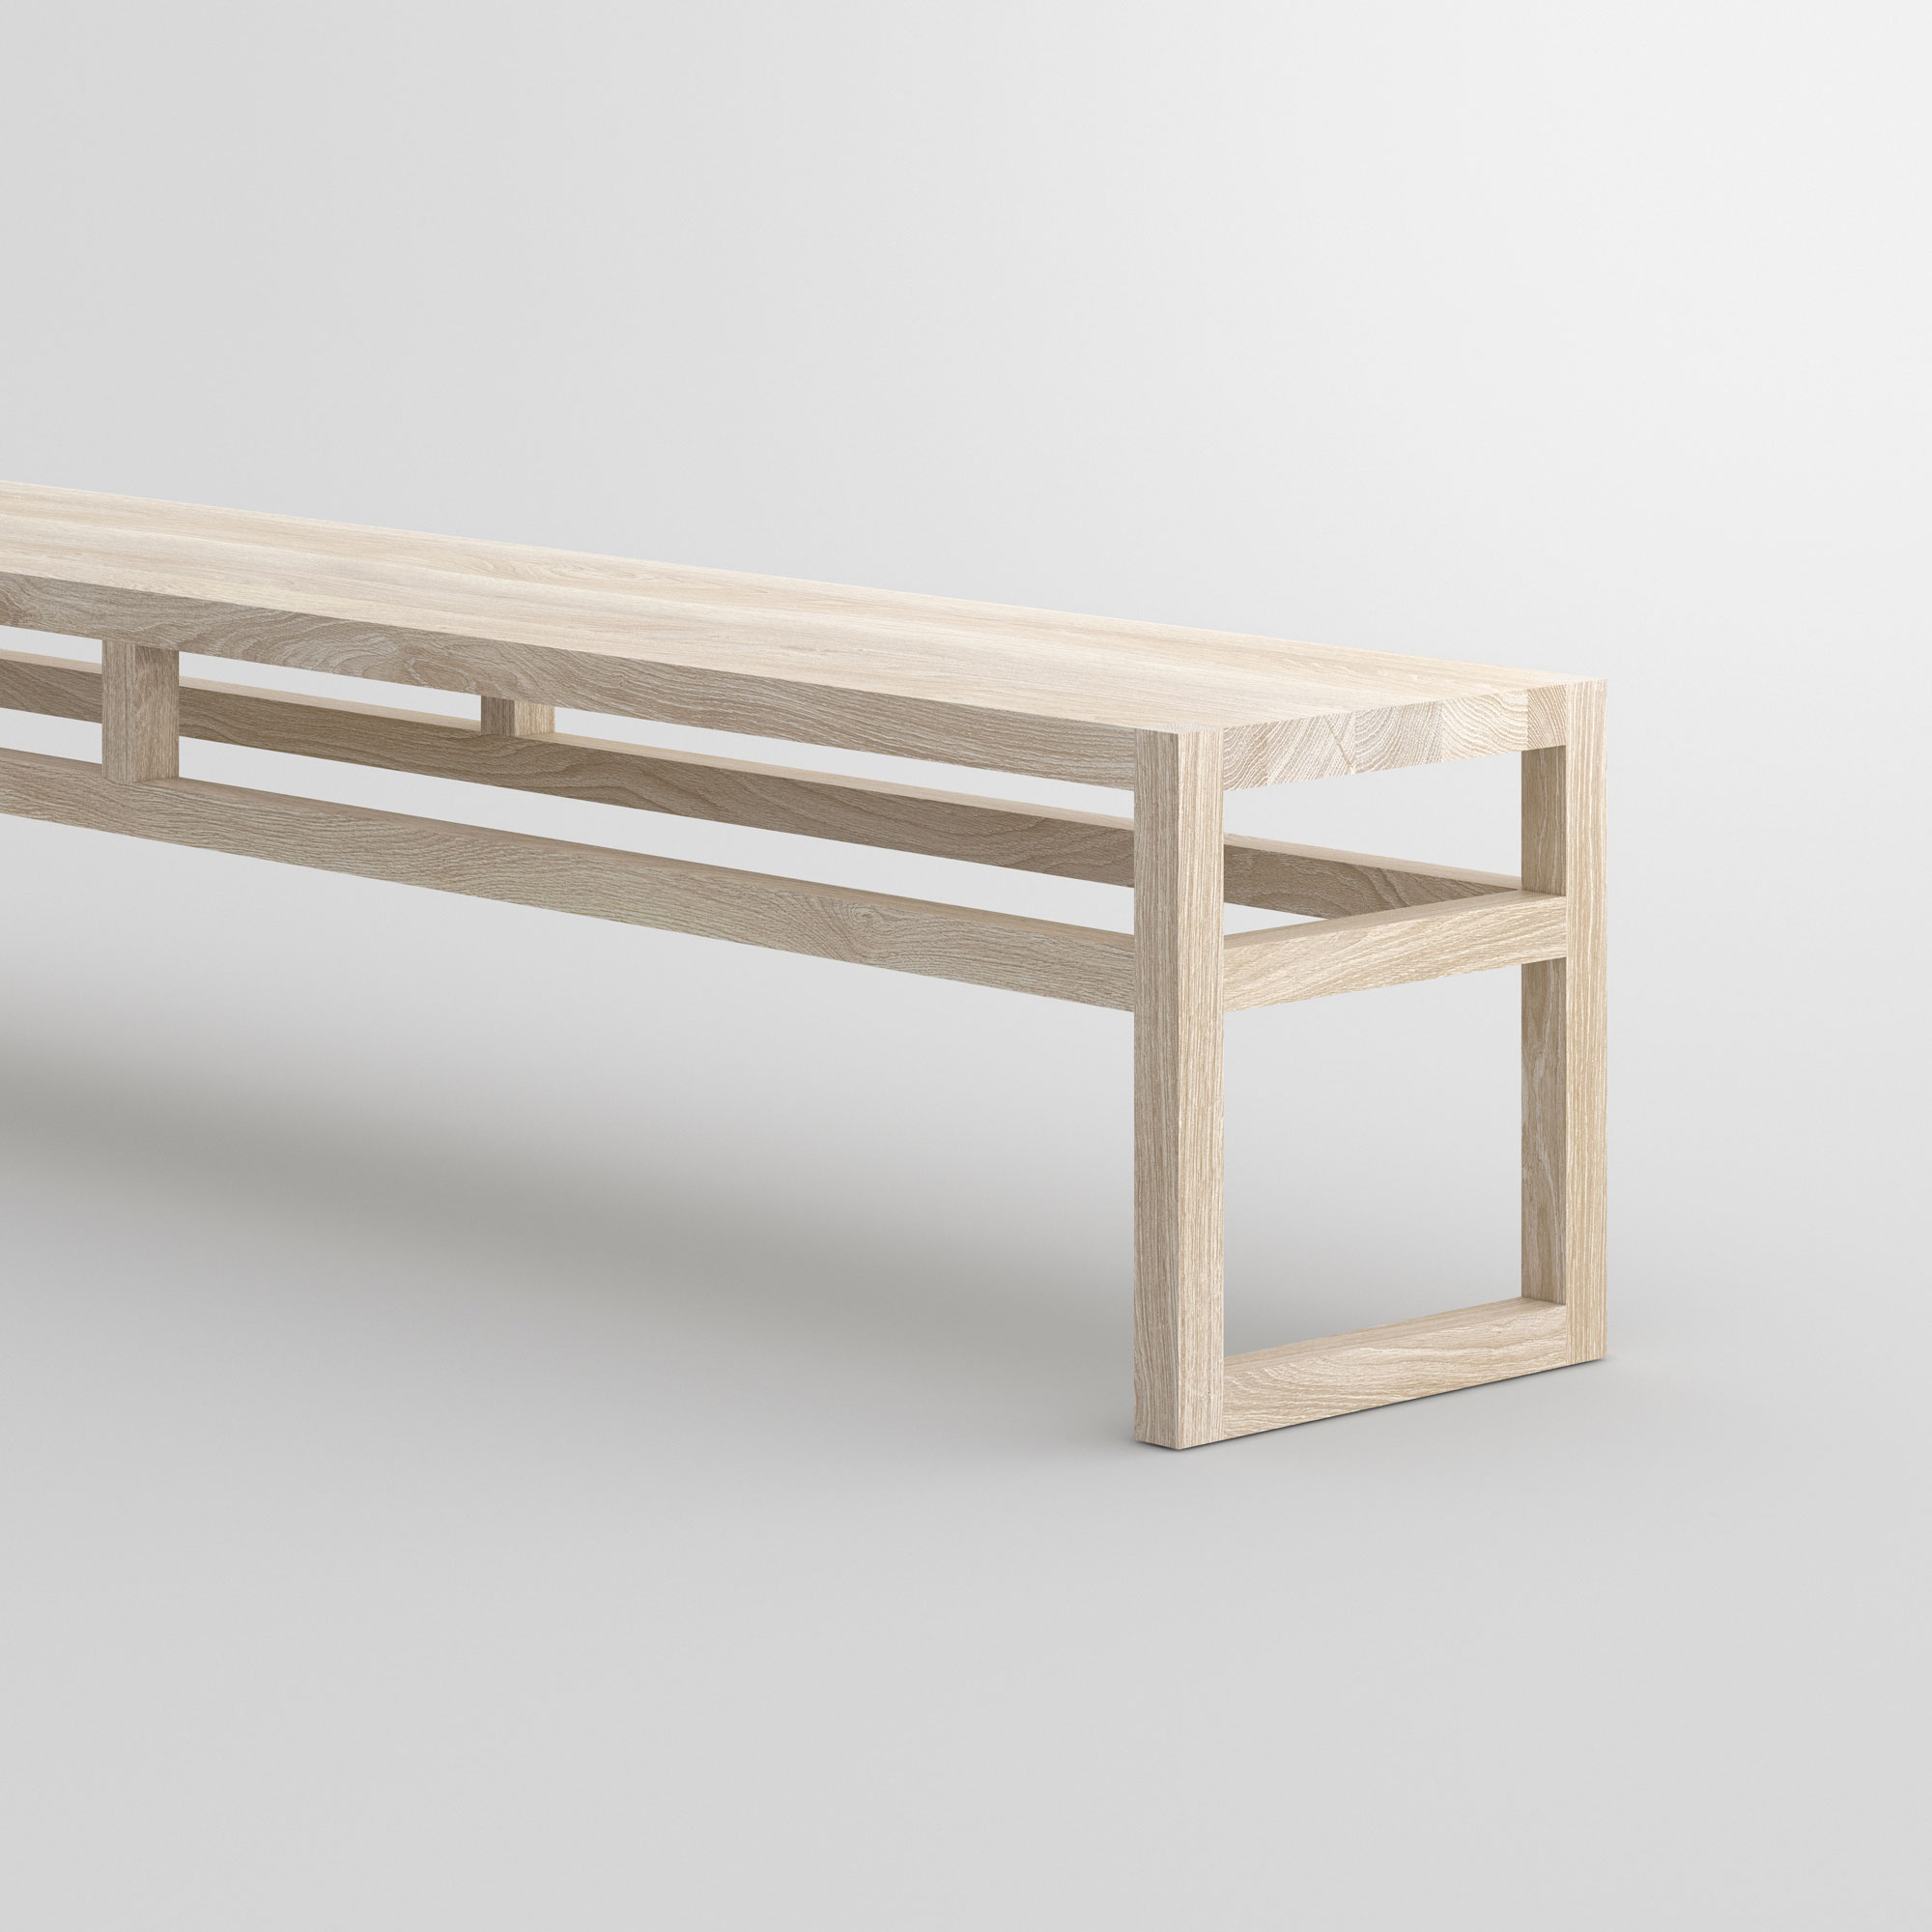 Dining Room Wood Bench SENA cam2 custom made in solid wood by vitamin design